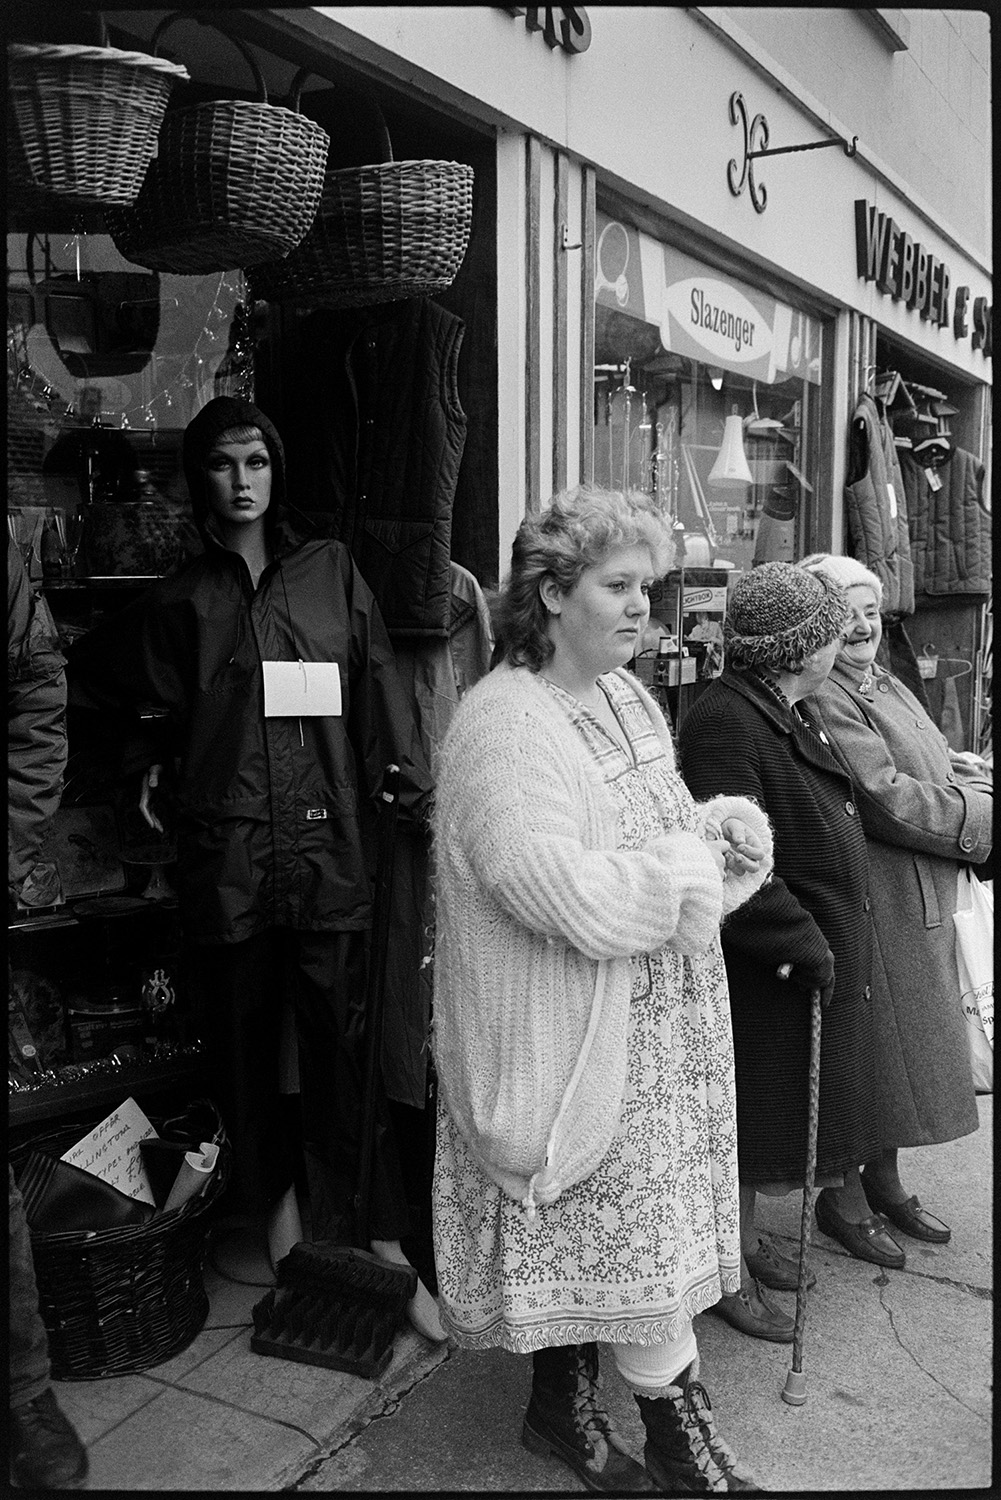 Woman waiting outside shop.
[Women standing outside Webber & Son shop in South Molton. Two women chatting. Baskets and a mannequin modelling clothes are outside the shopfront.]